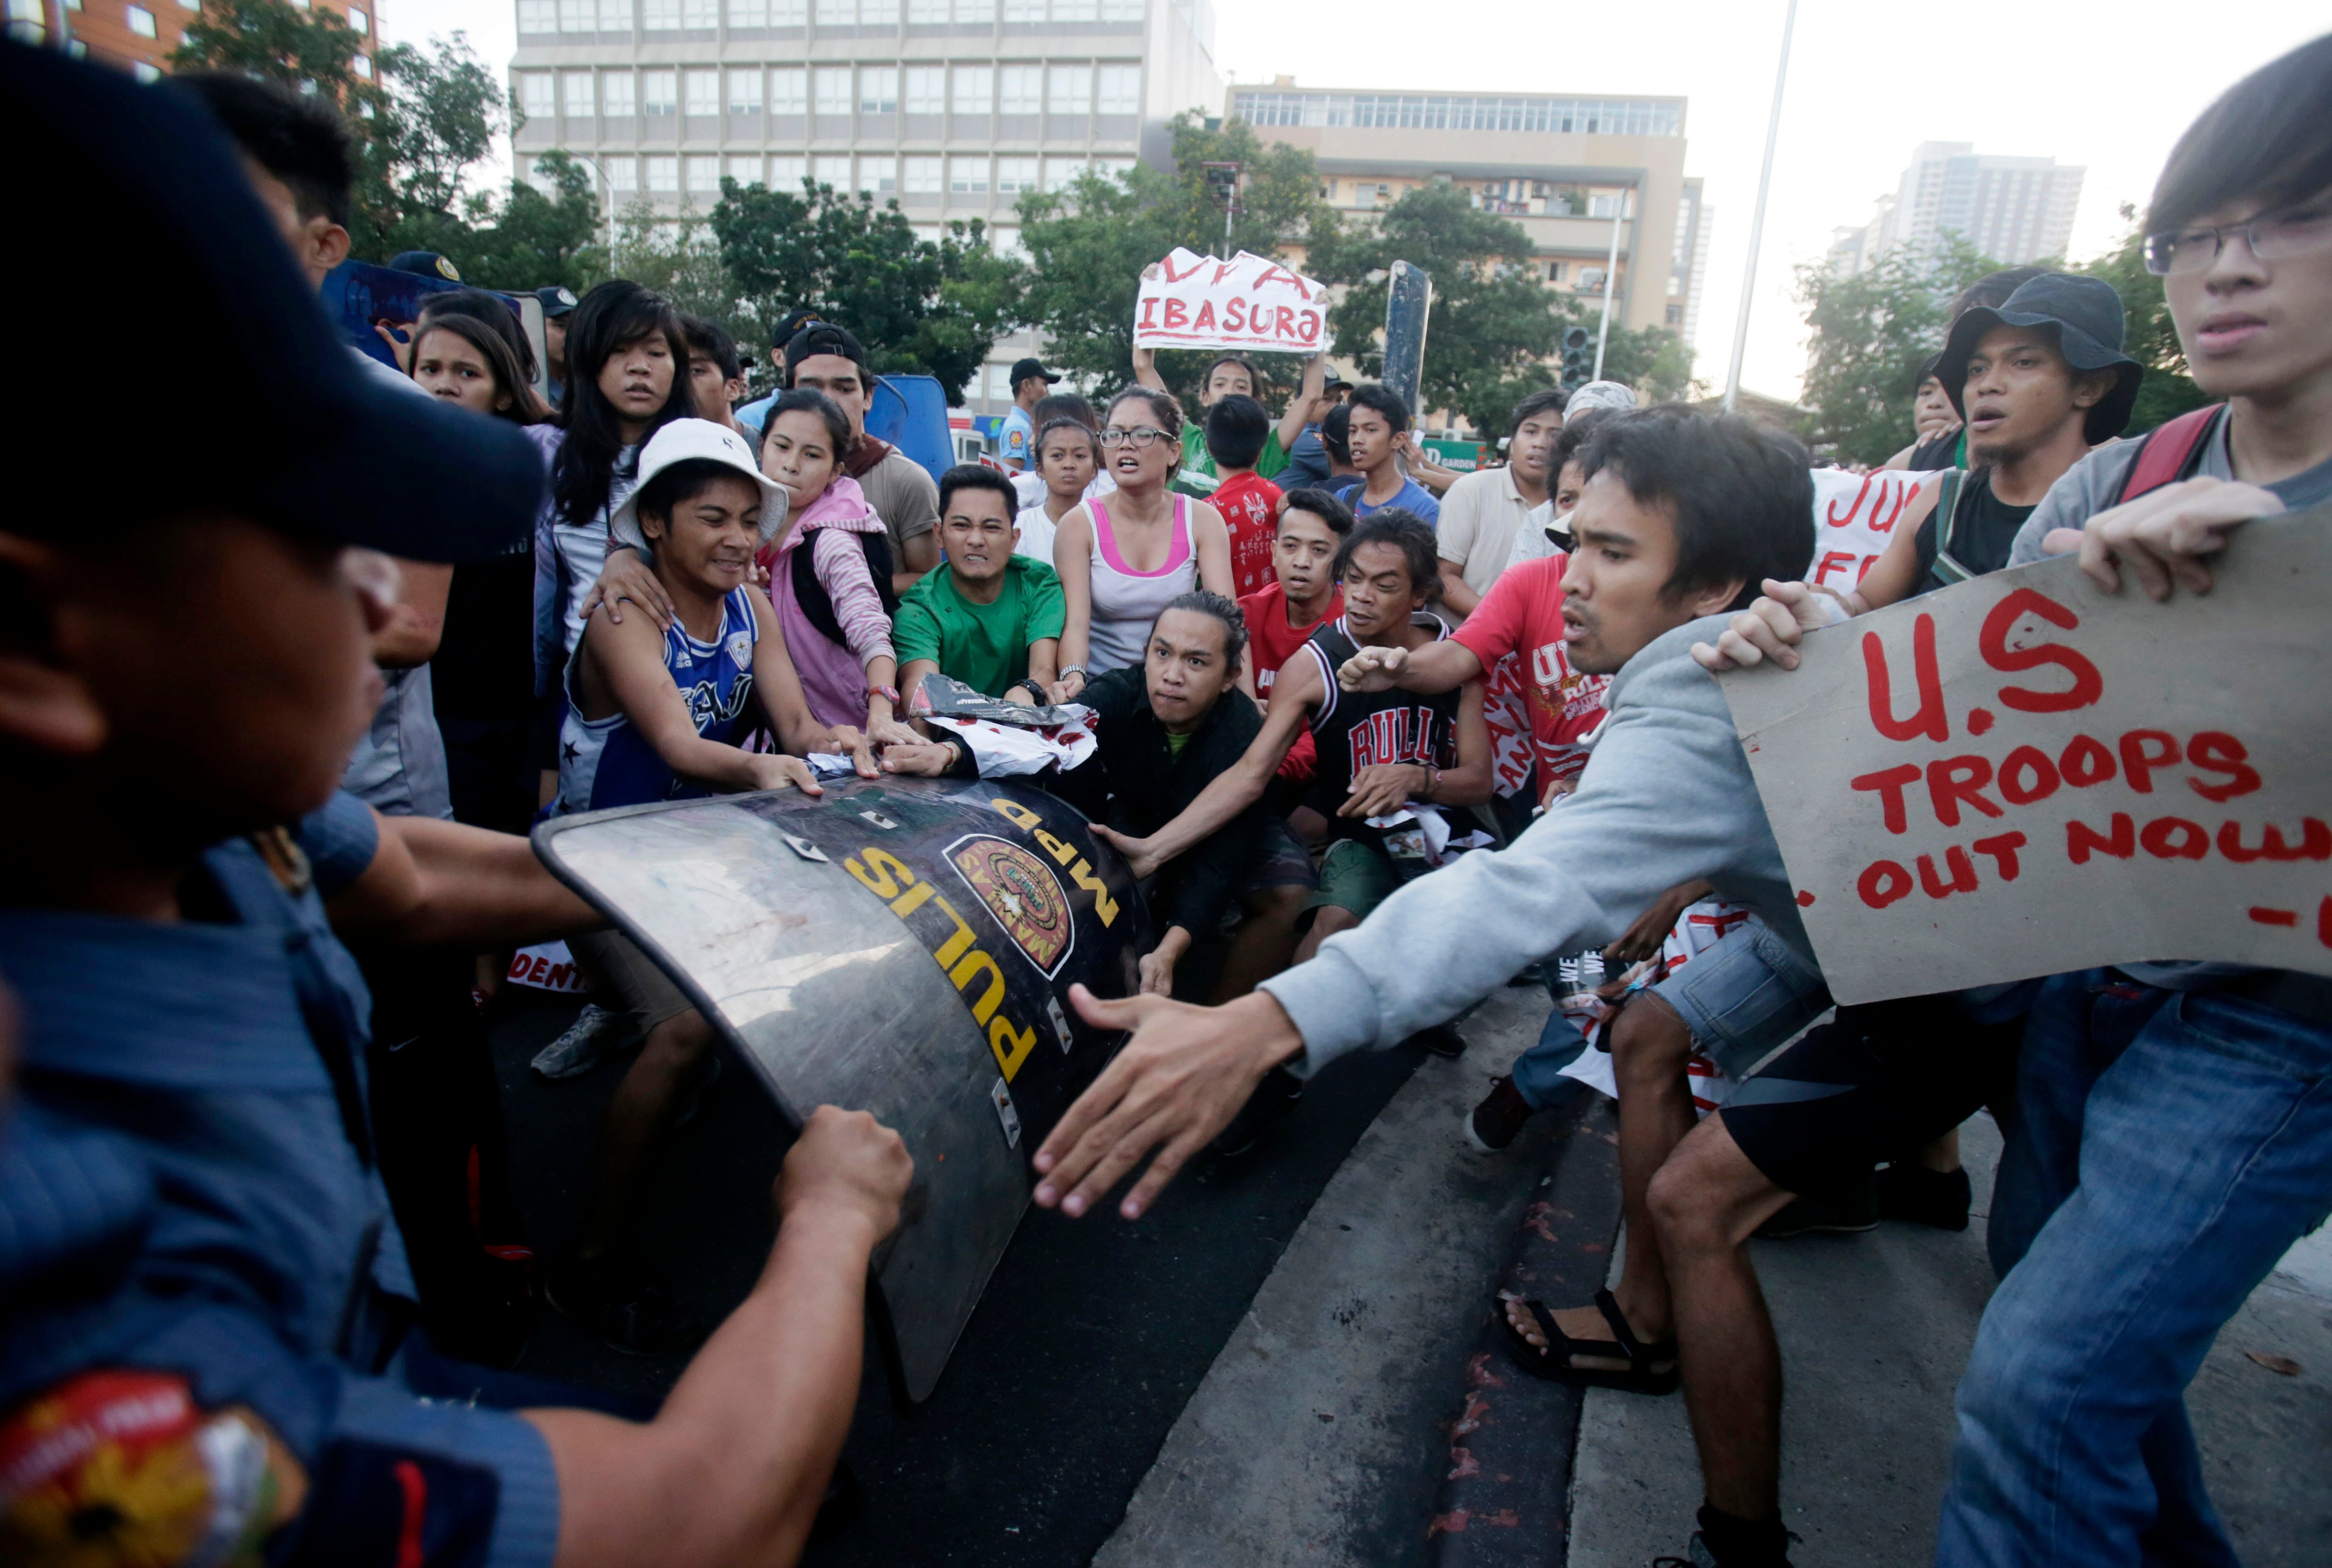 Protesters grab the riot shield of a police officer as the former managed to slip past them for a rally to mark the 24th year anniversary of the termination of the U.S. military bases in the country Wednesday, Sept. 16, 2015 at the U.S. Embassy in Manila, Philippines. (Bullit Marquez&mdash;AP)